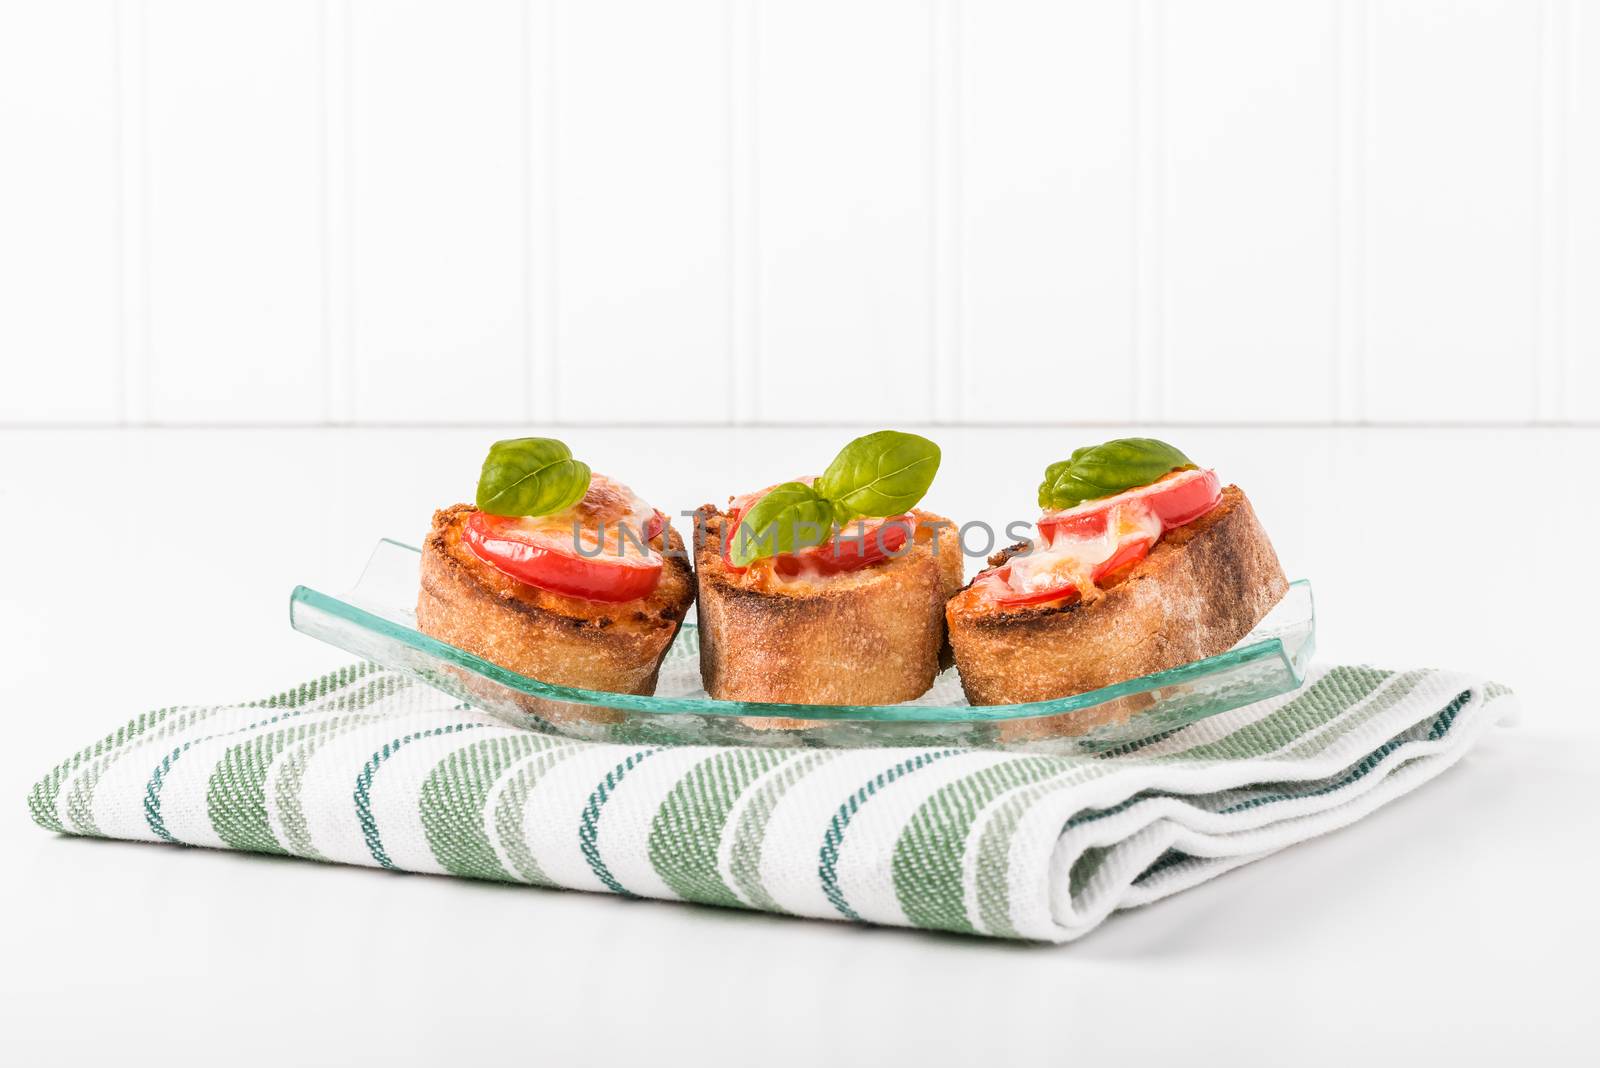 Tomato, mozzarella and basil crostini in a glass plate.  Useful for a number of food service promotional applications.